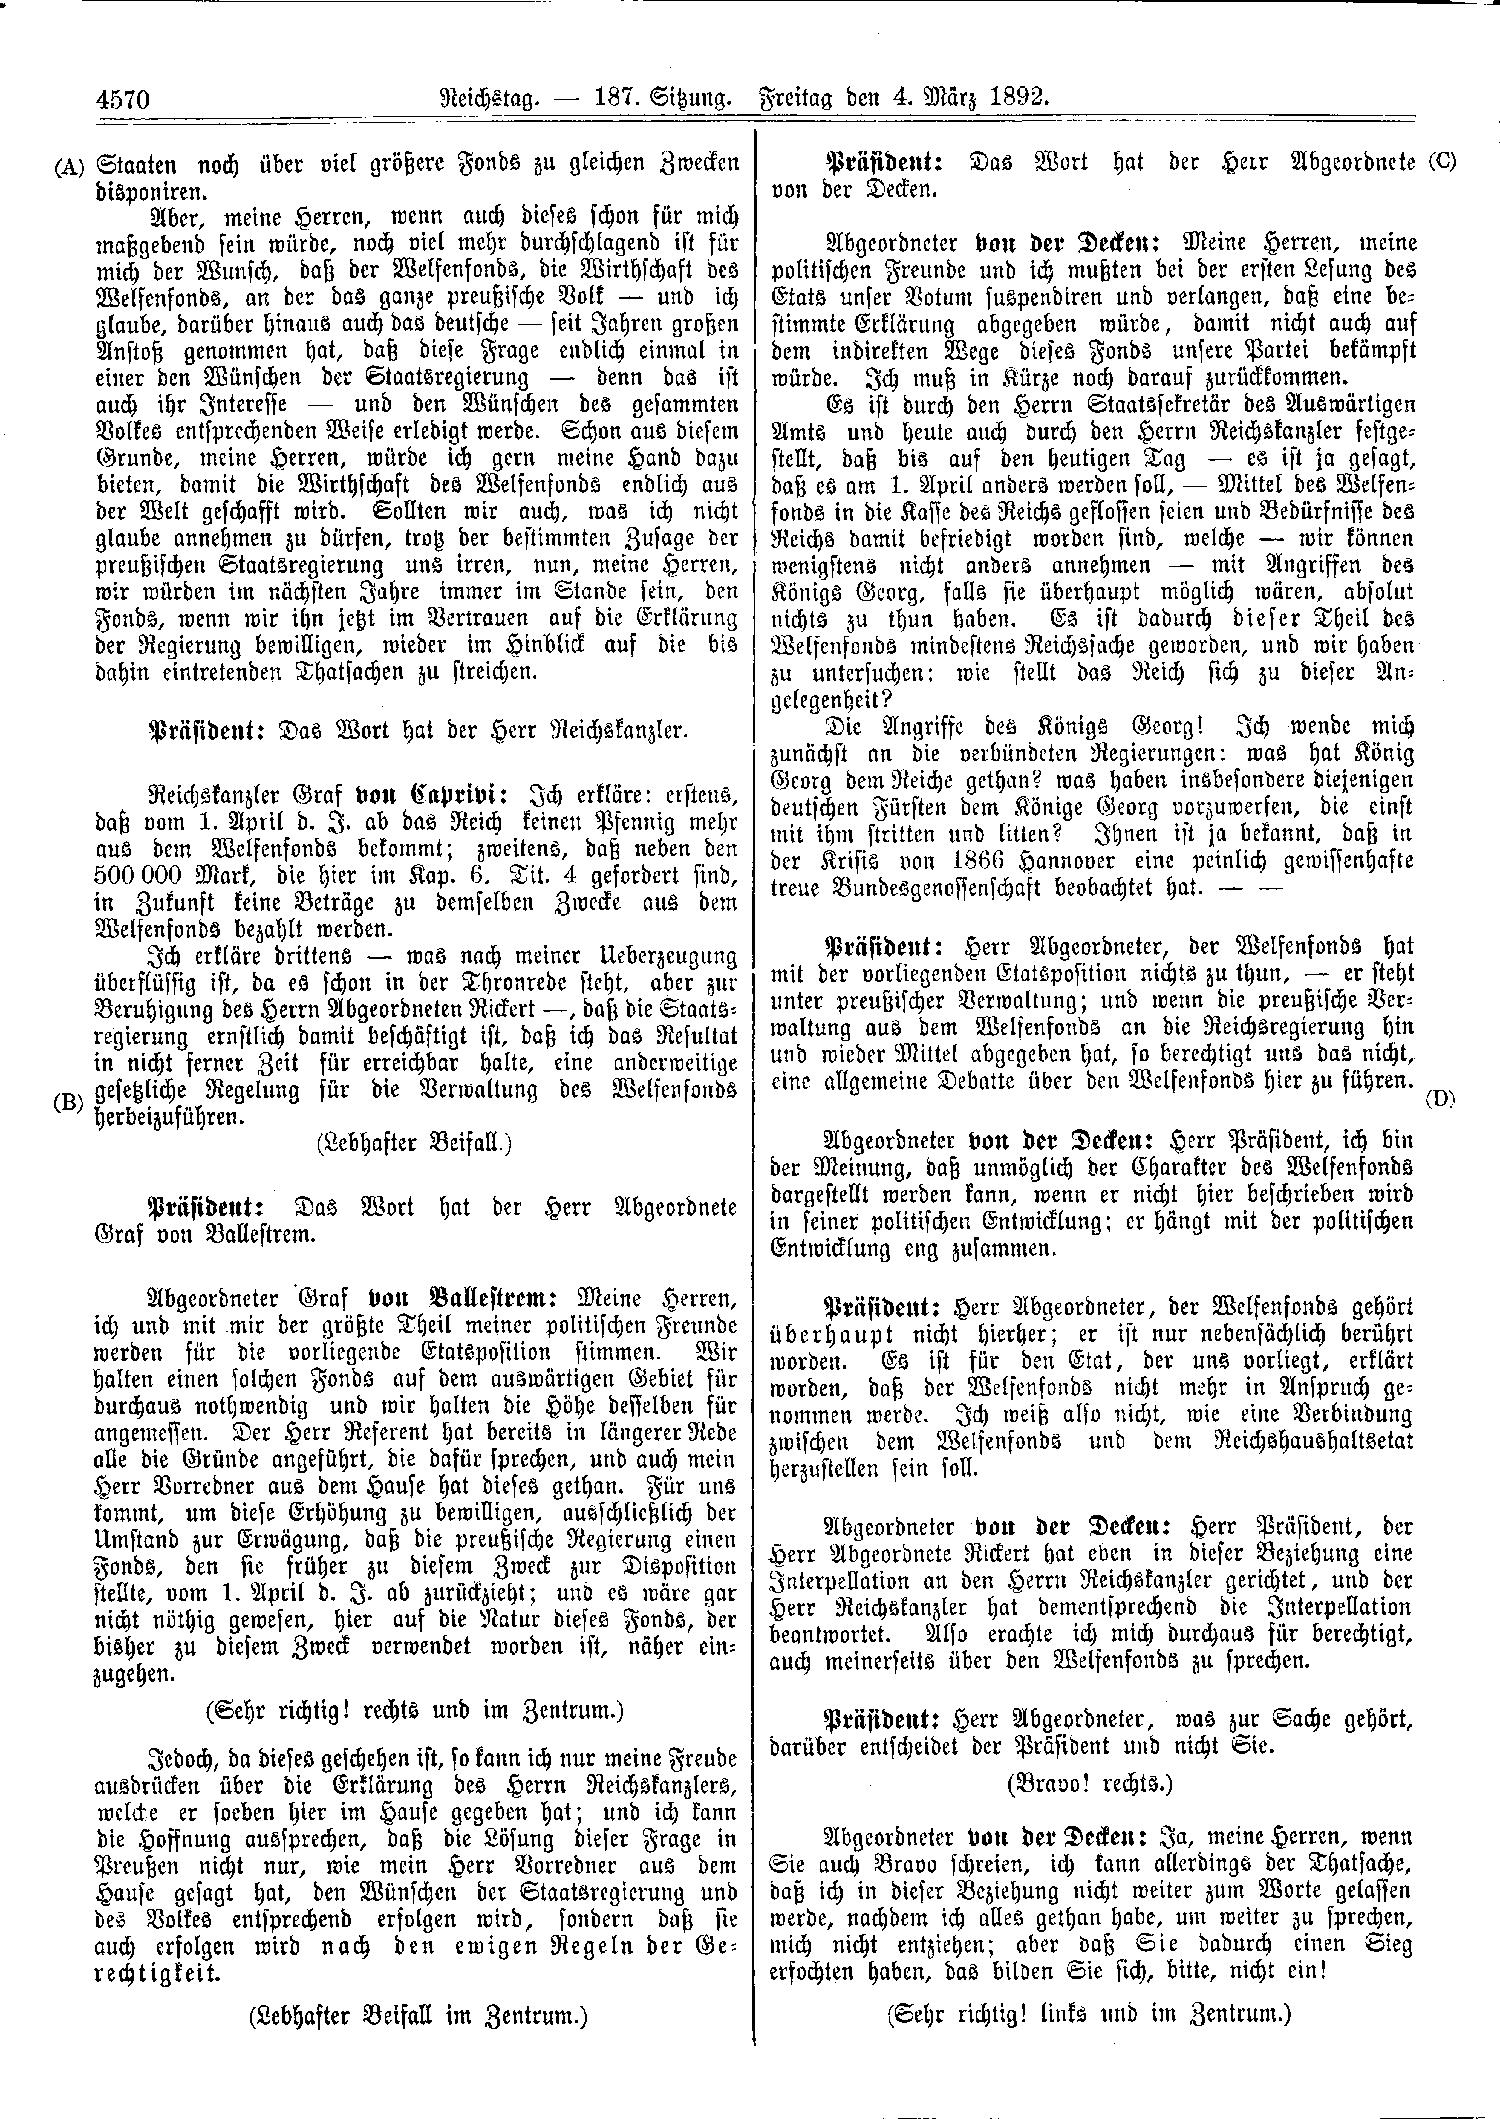 Scan of page 4570